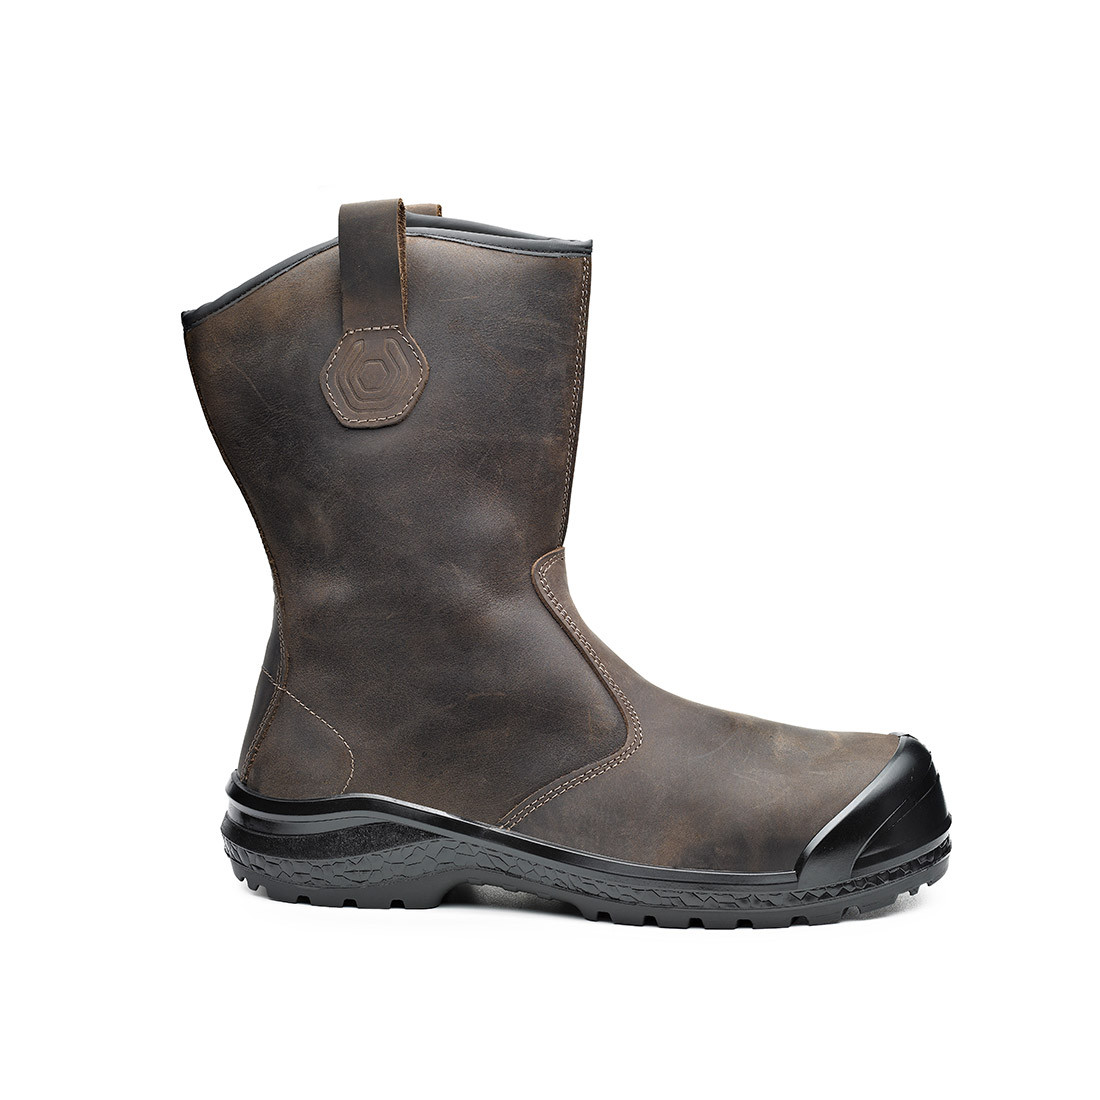 Be-Extreme Winter Boot S3 CI - Footwear